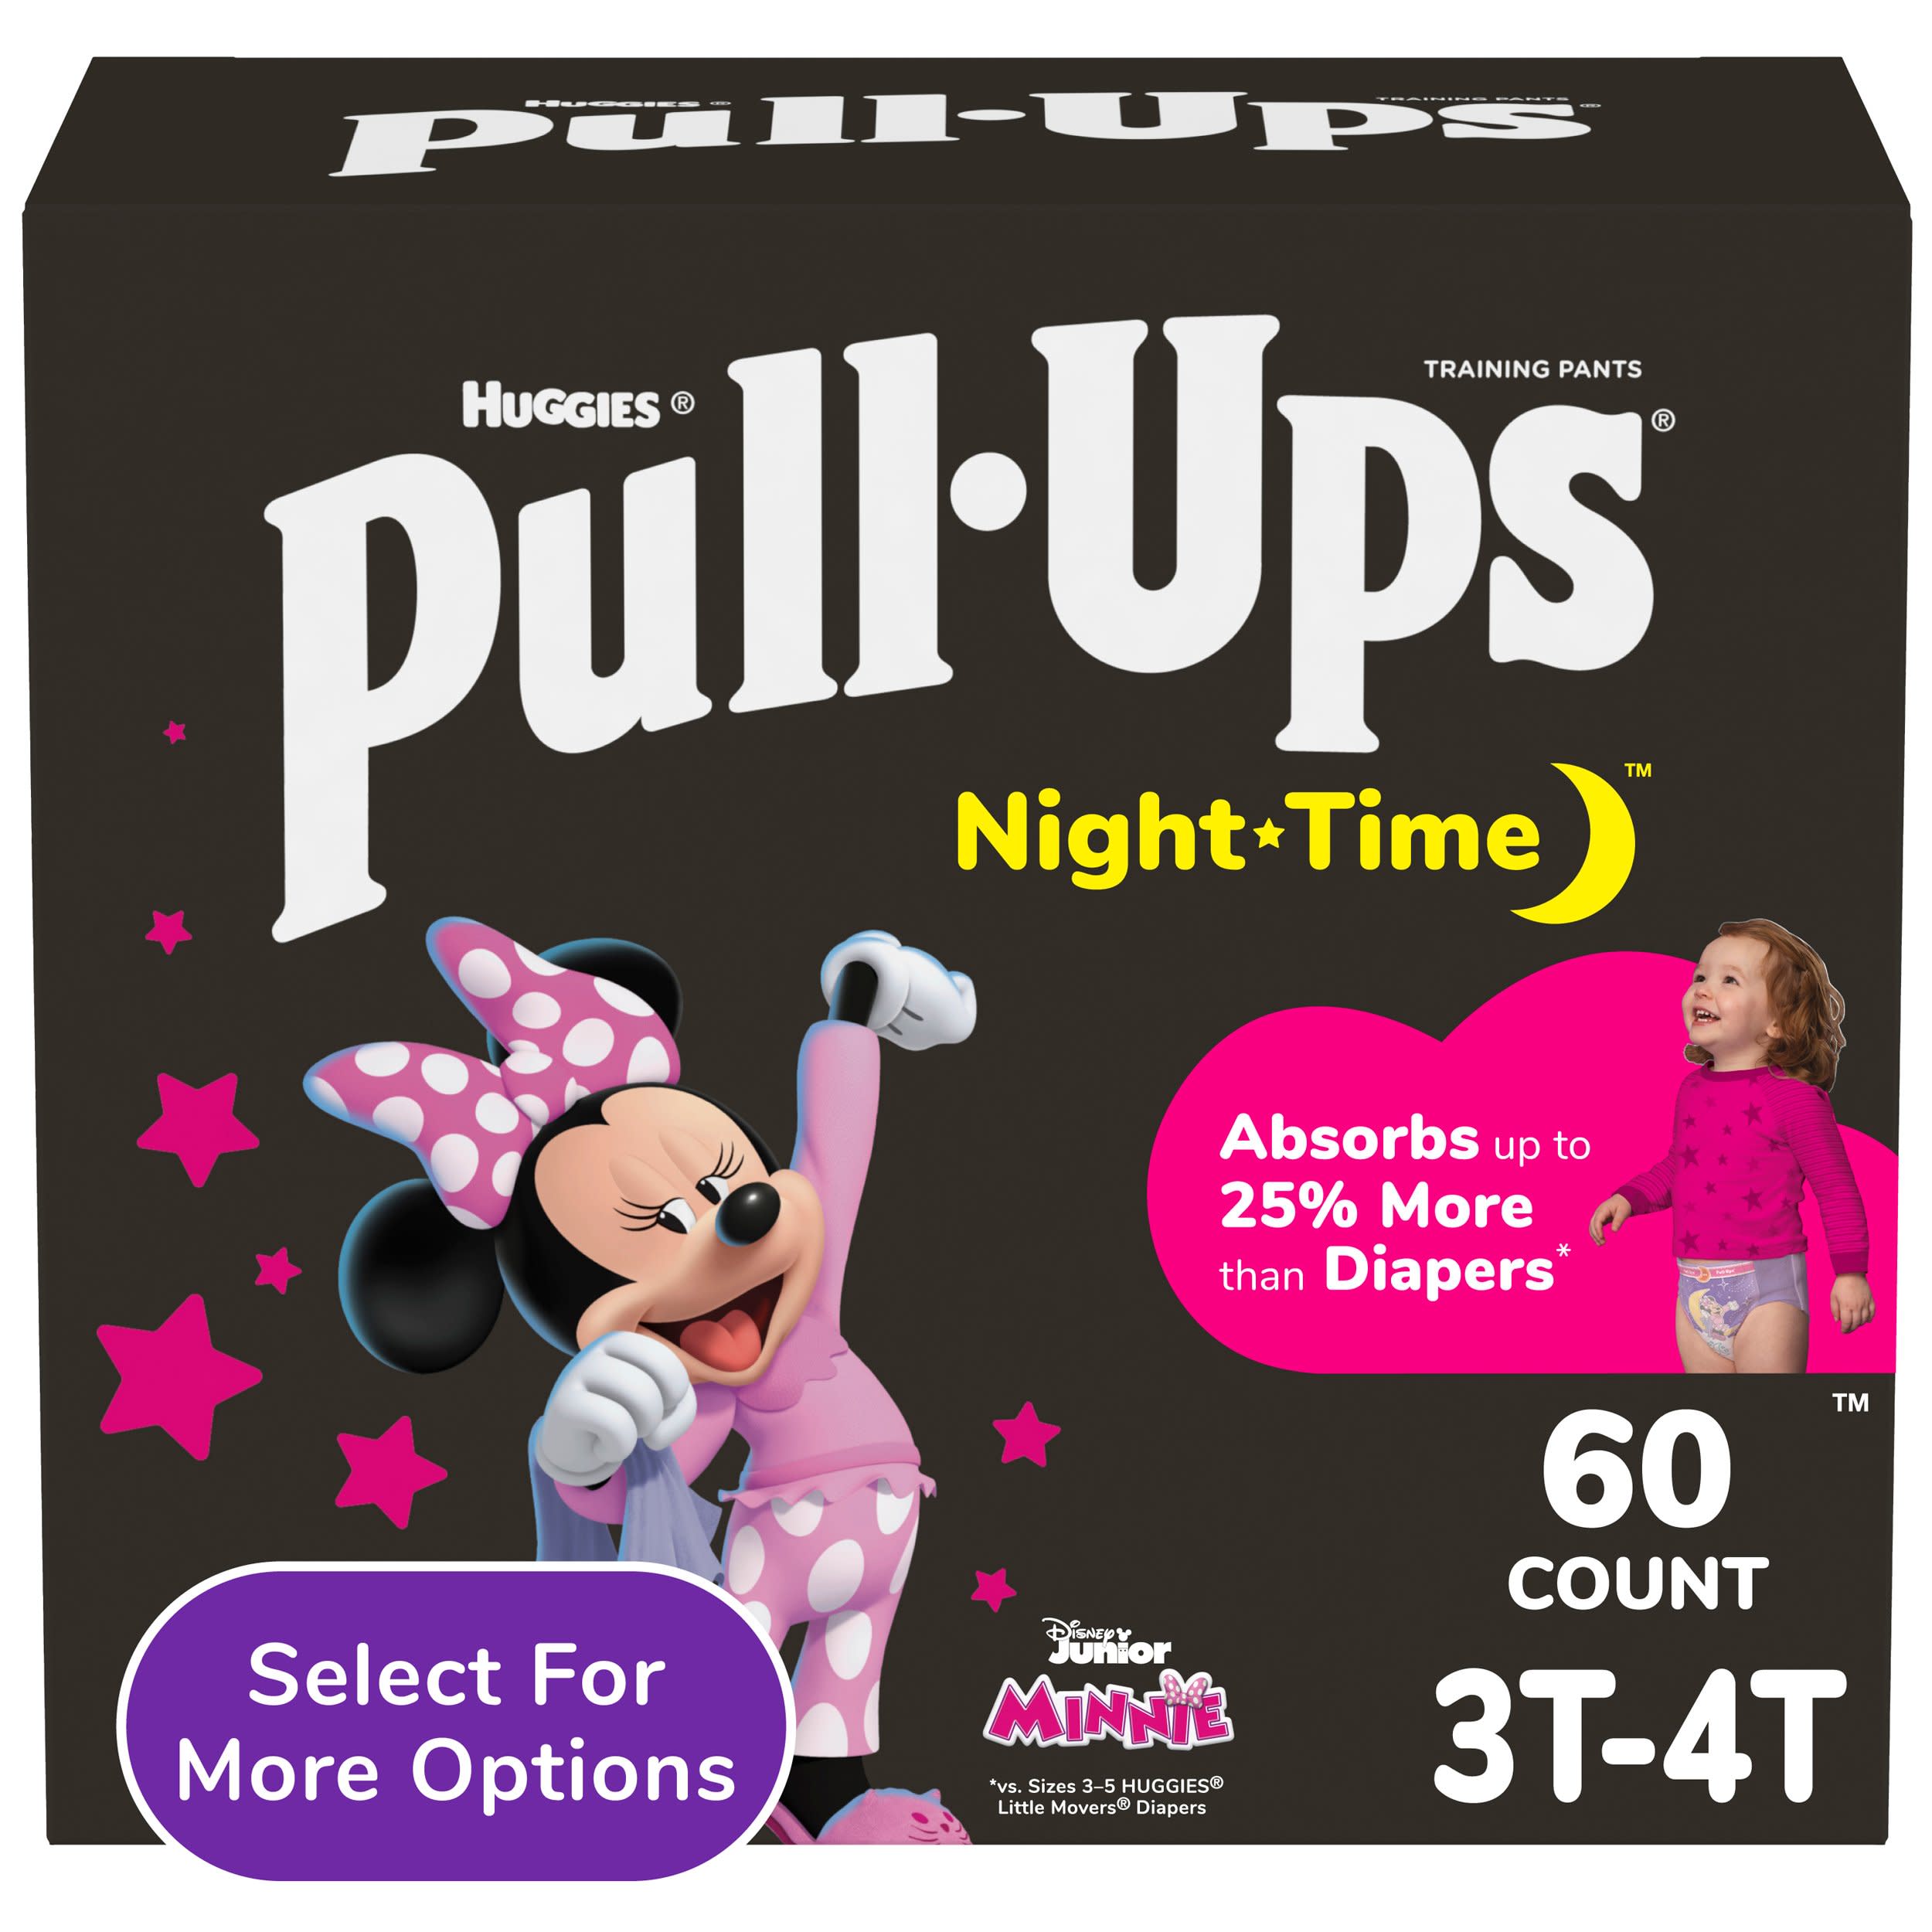 Pull-Ups Girls' Night-Time Training Pants, 3T-4T (32-40 lbs), 60 Ct (Select for More Options) - image 1 of 12